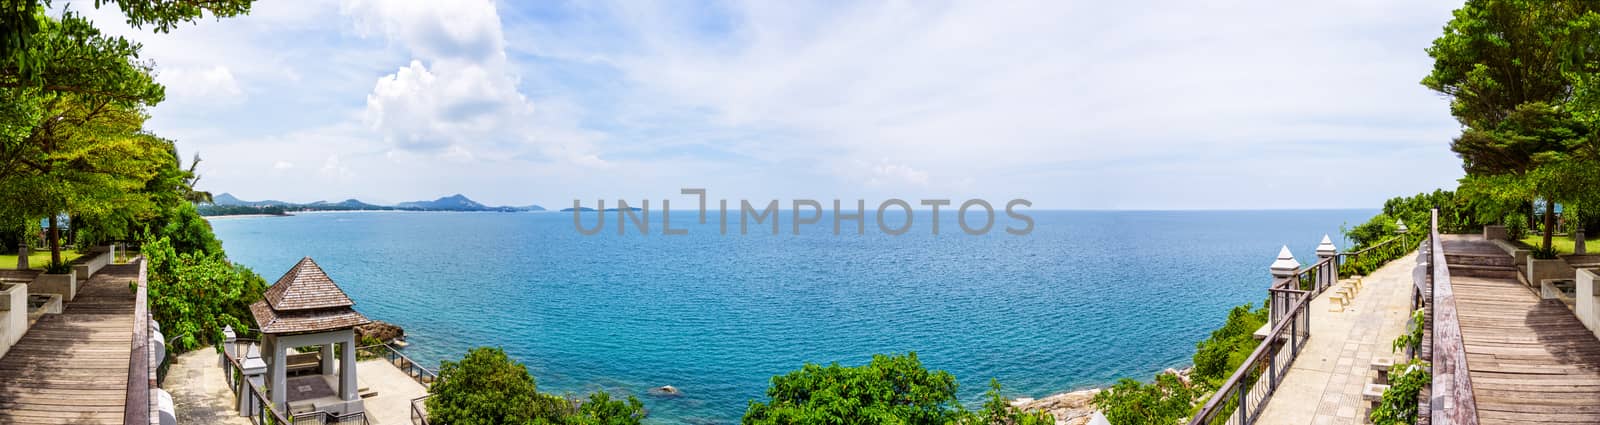 Lad Koh View Point, High angle view panorama beautiful nature landscape of rocks on the coastline with blue sea under the summer sky at Koh Samui island, Surat Thani, Thailand